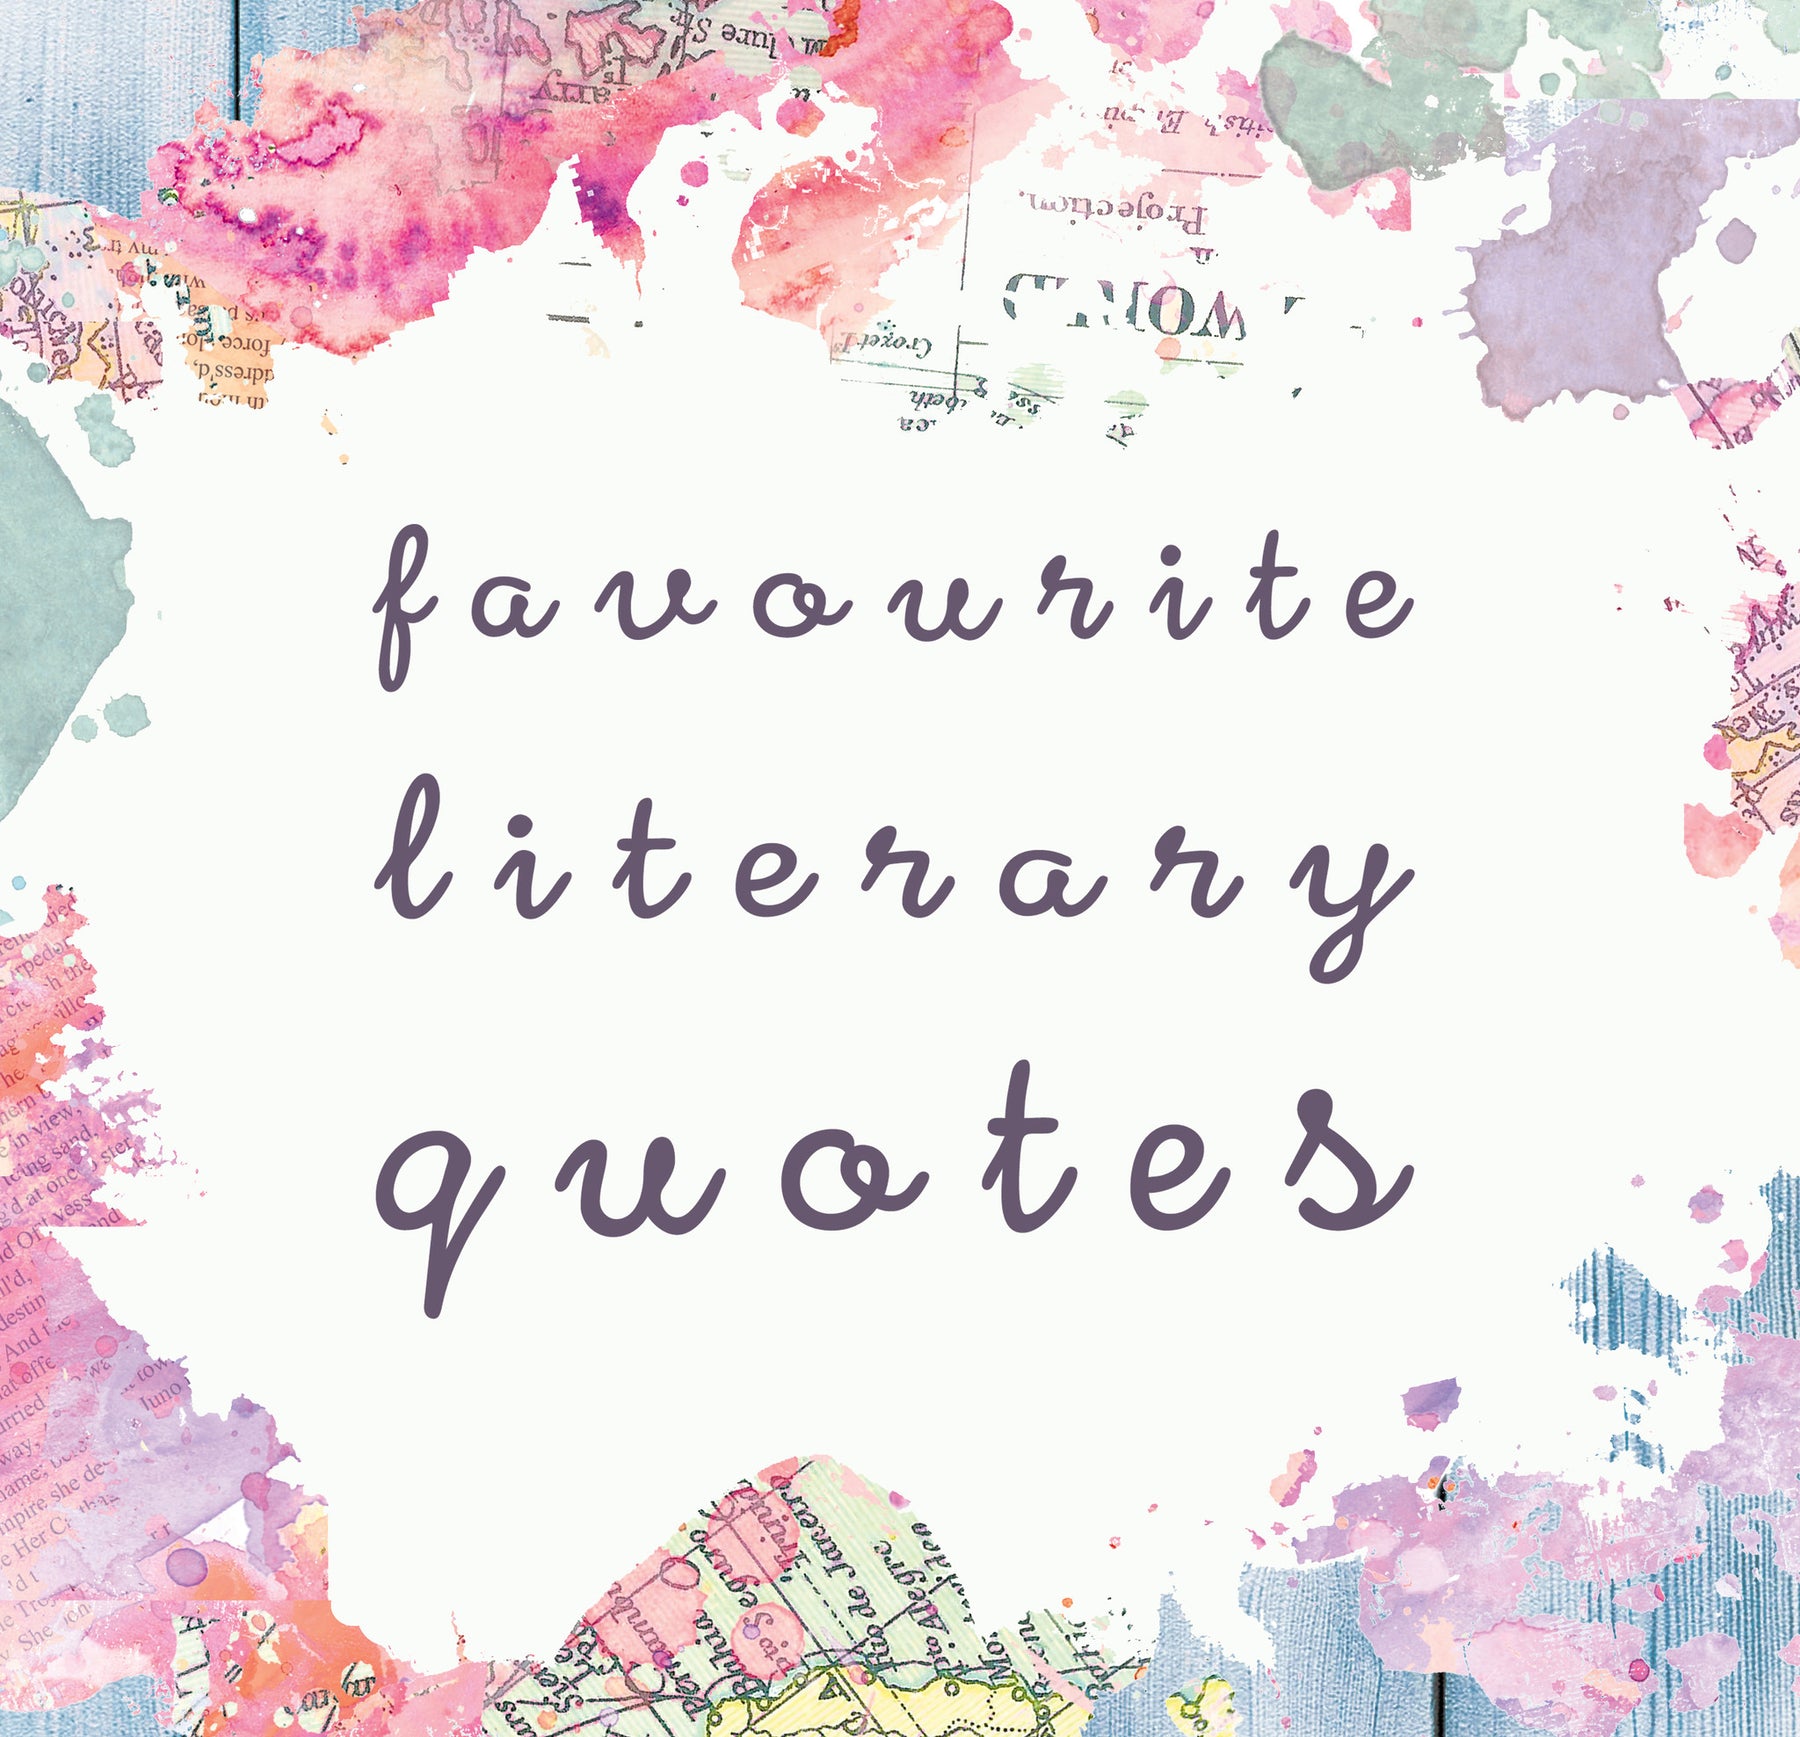 Bookishly's Favourite Literary Quotes